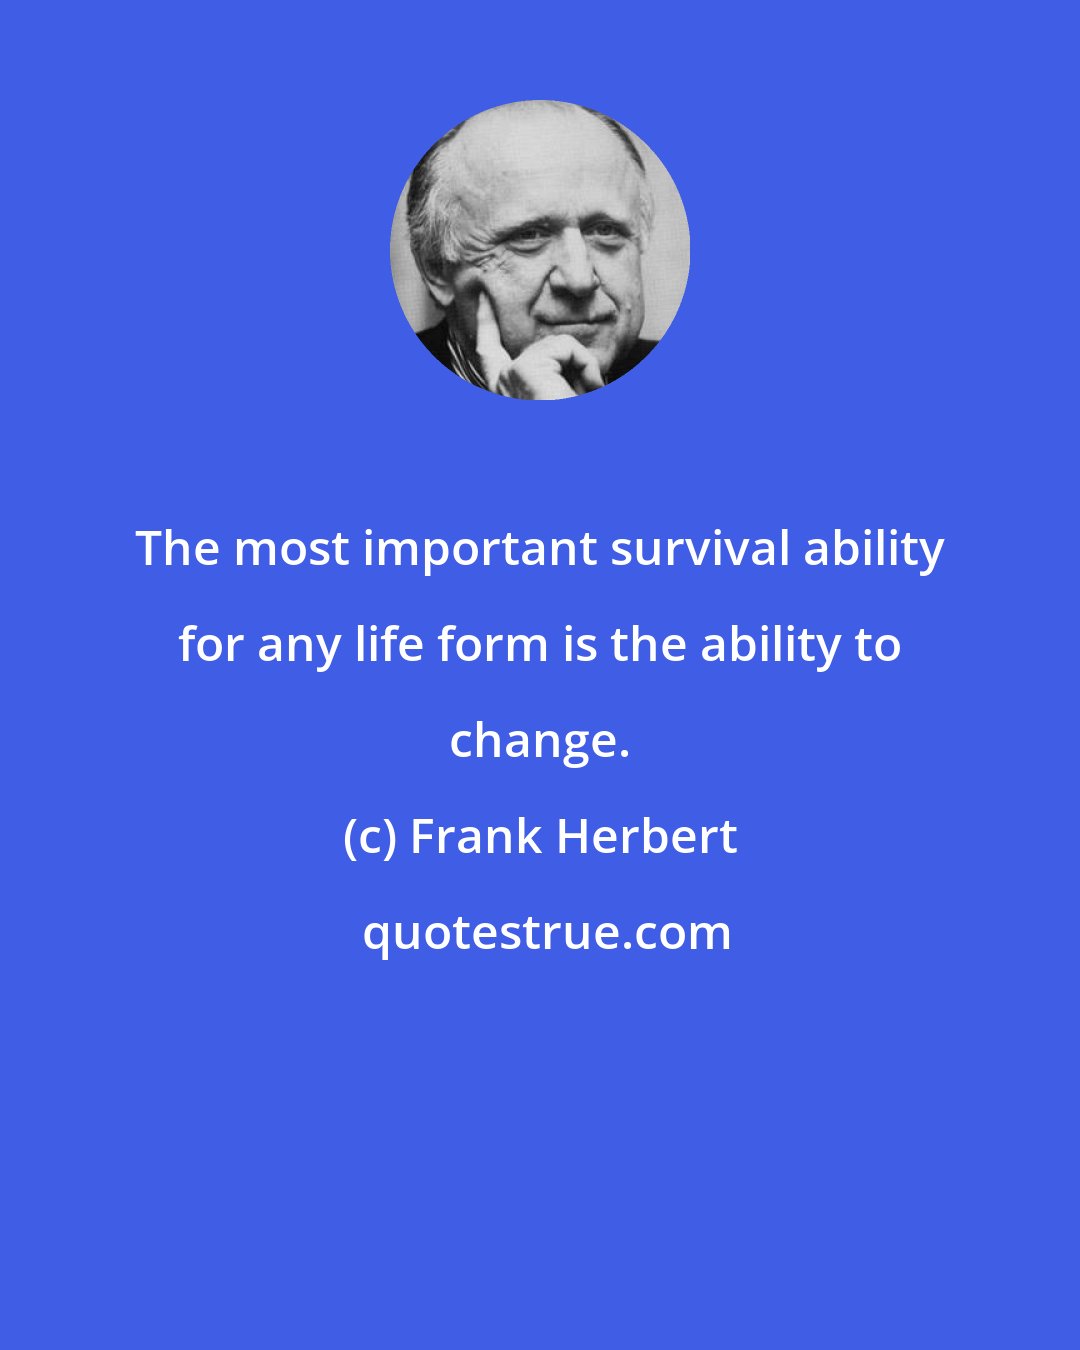 Frank Herbert: The most important survival ability for any life form is the ability to change.